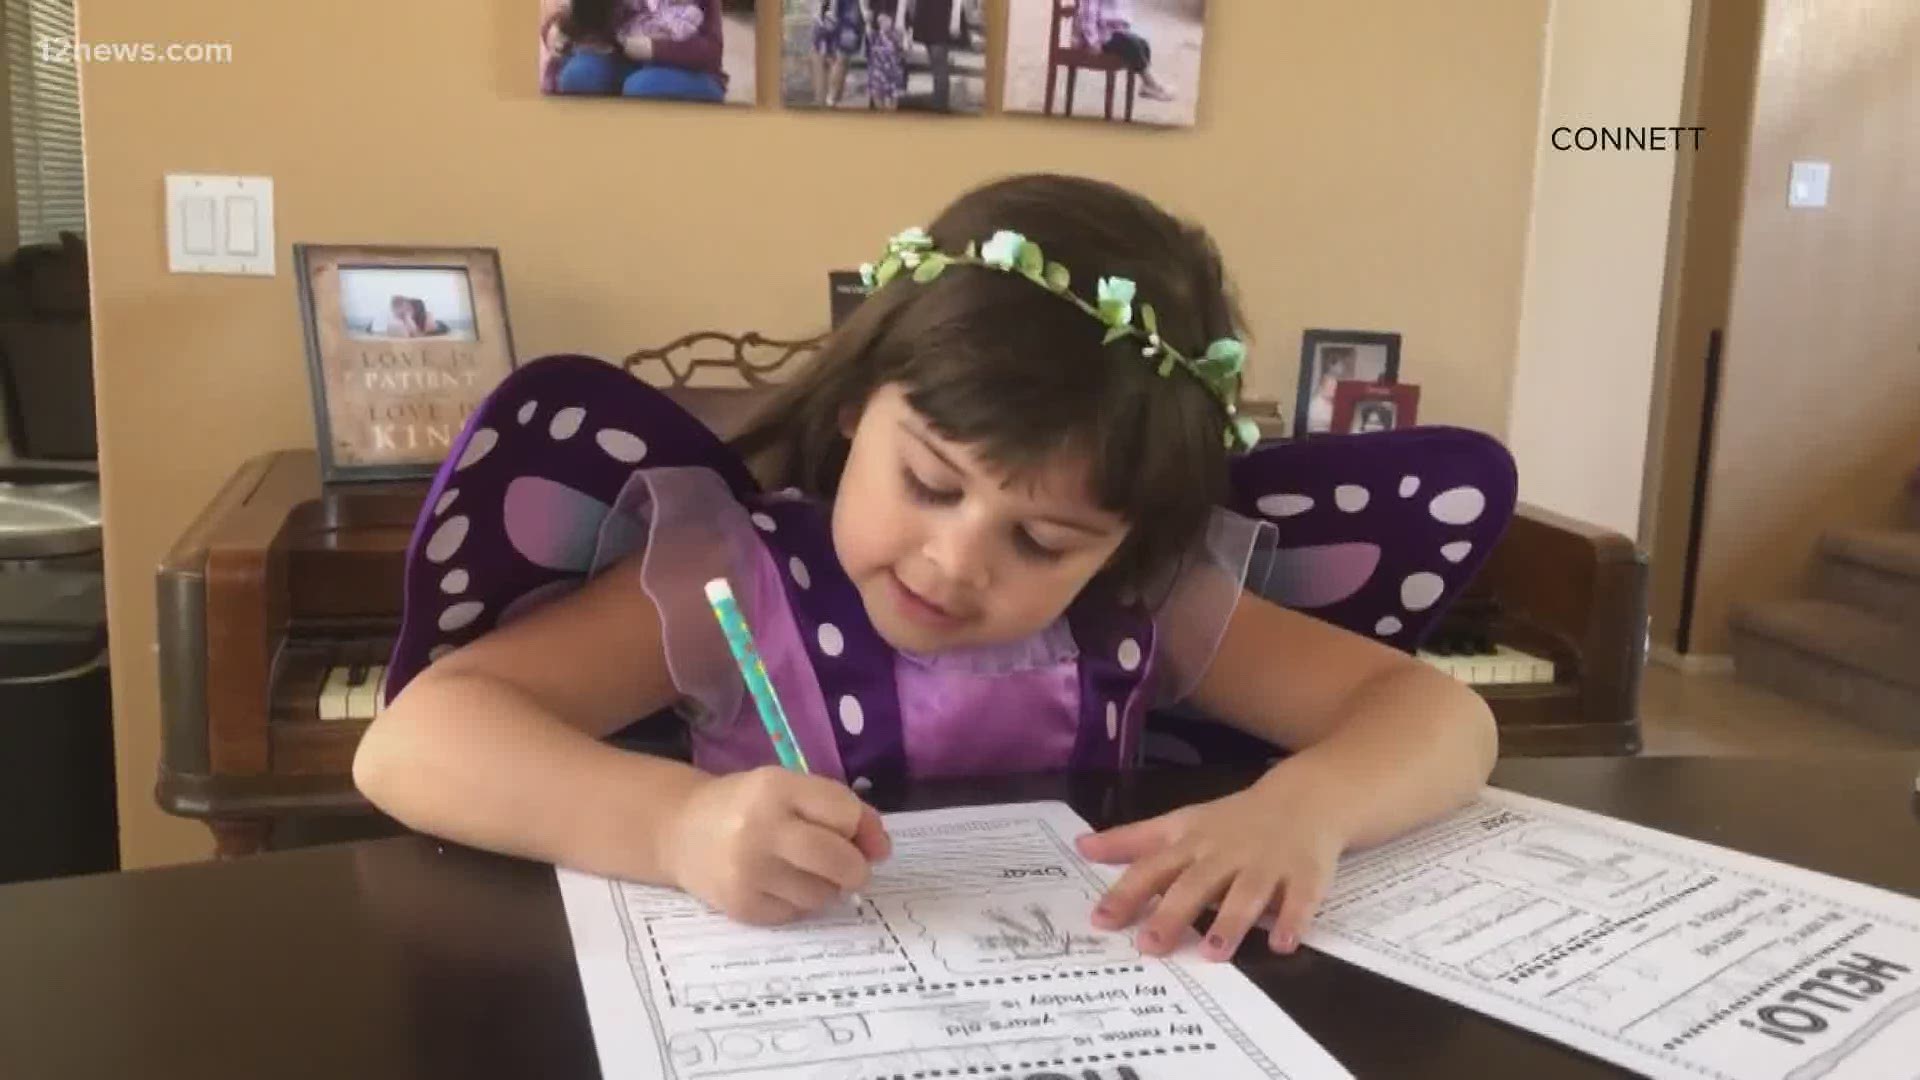 An East Coast assisted living center is receiving pen pal letters from the Valley. Five-year-old Claire is sending kindness through the mail using pencil and paper.